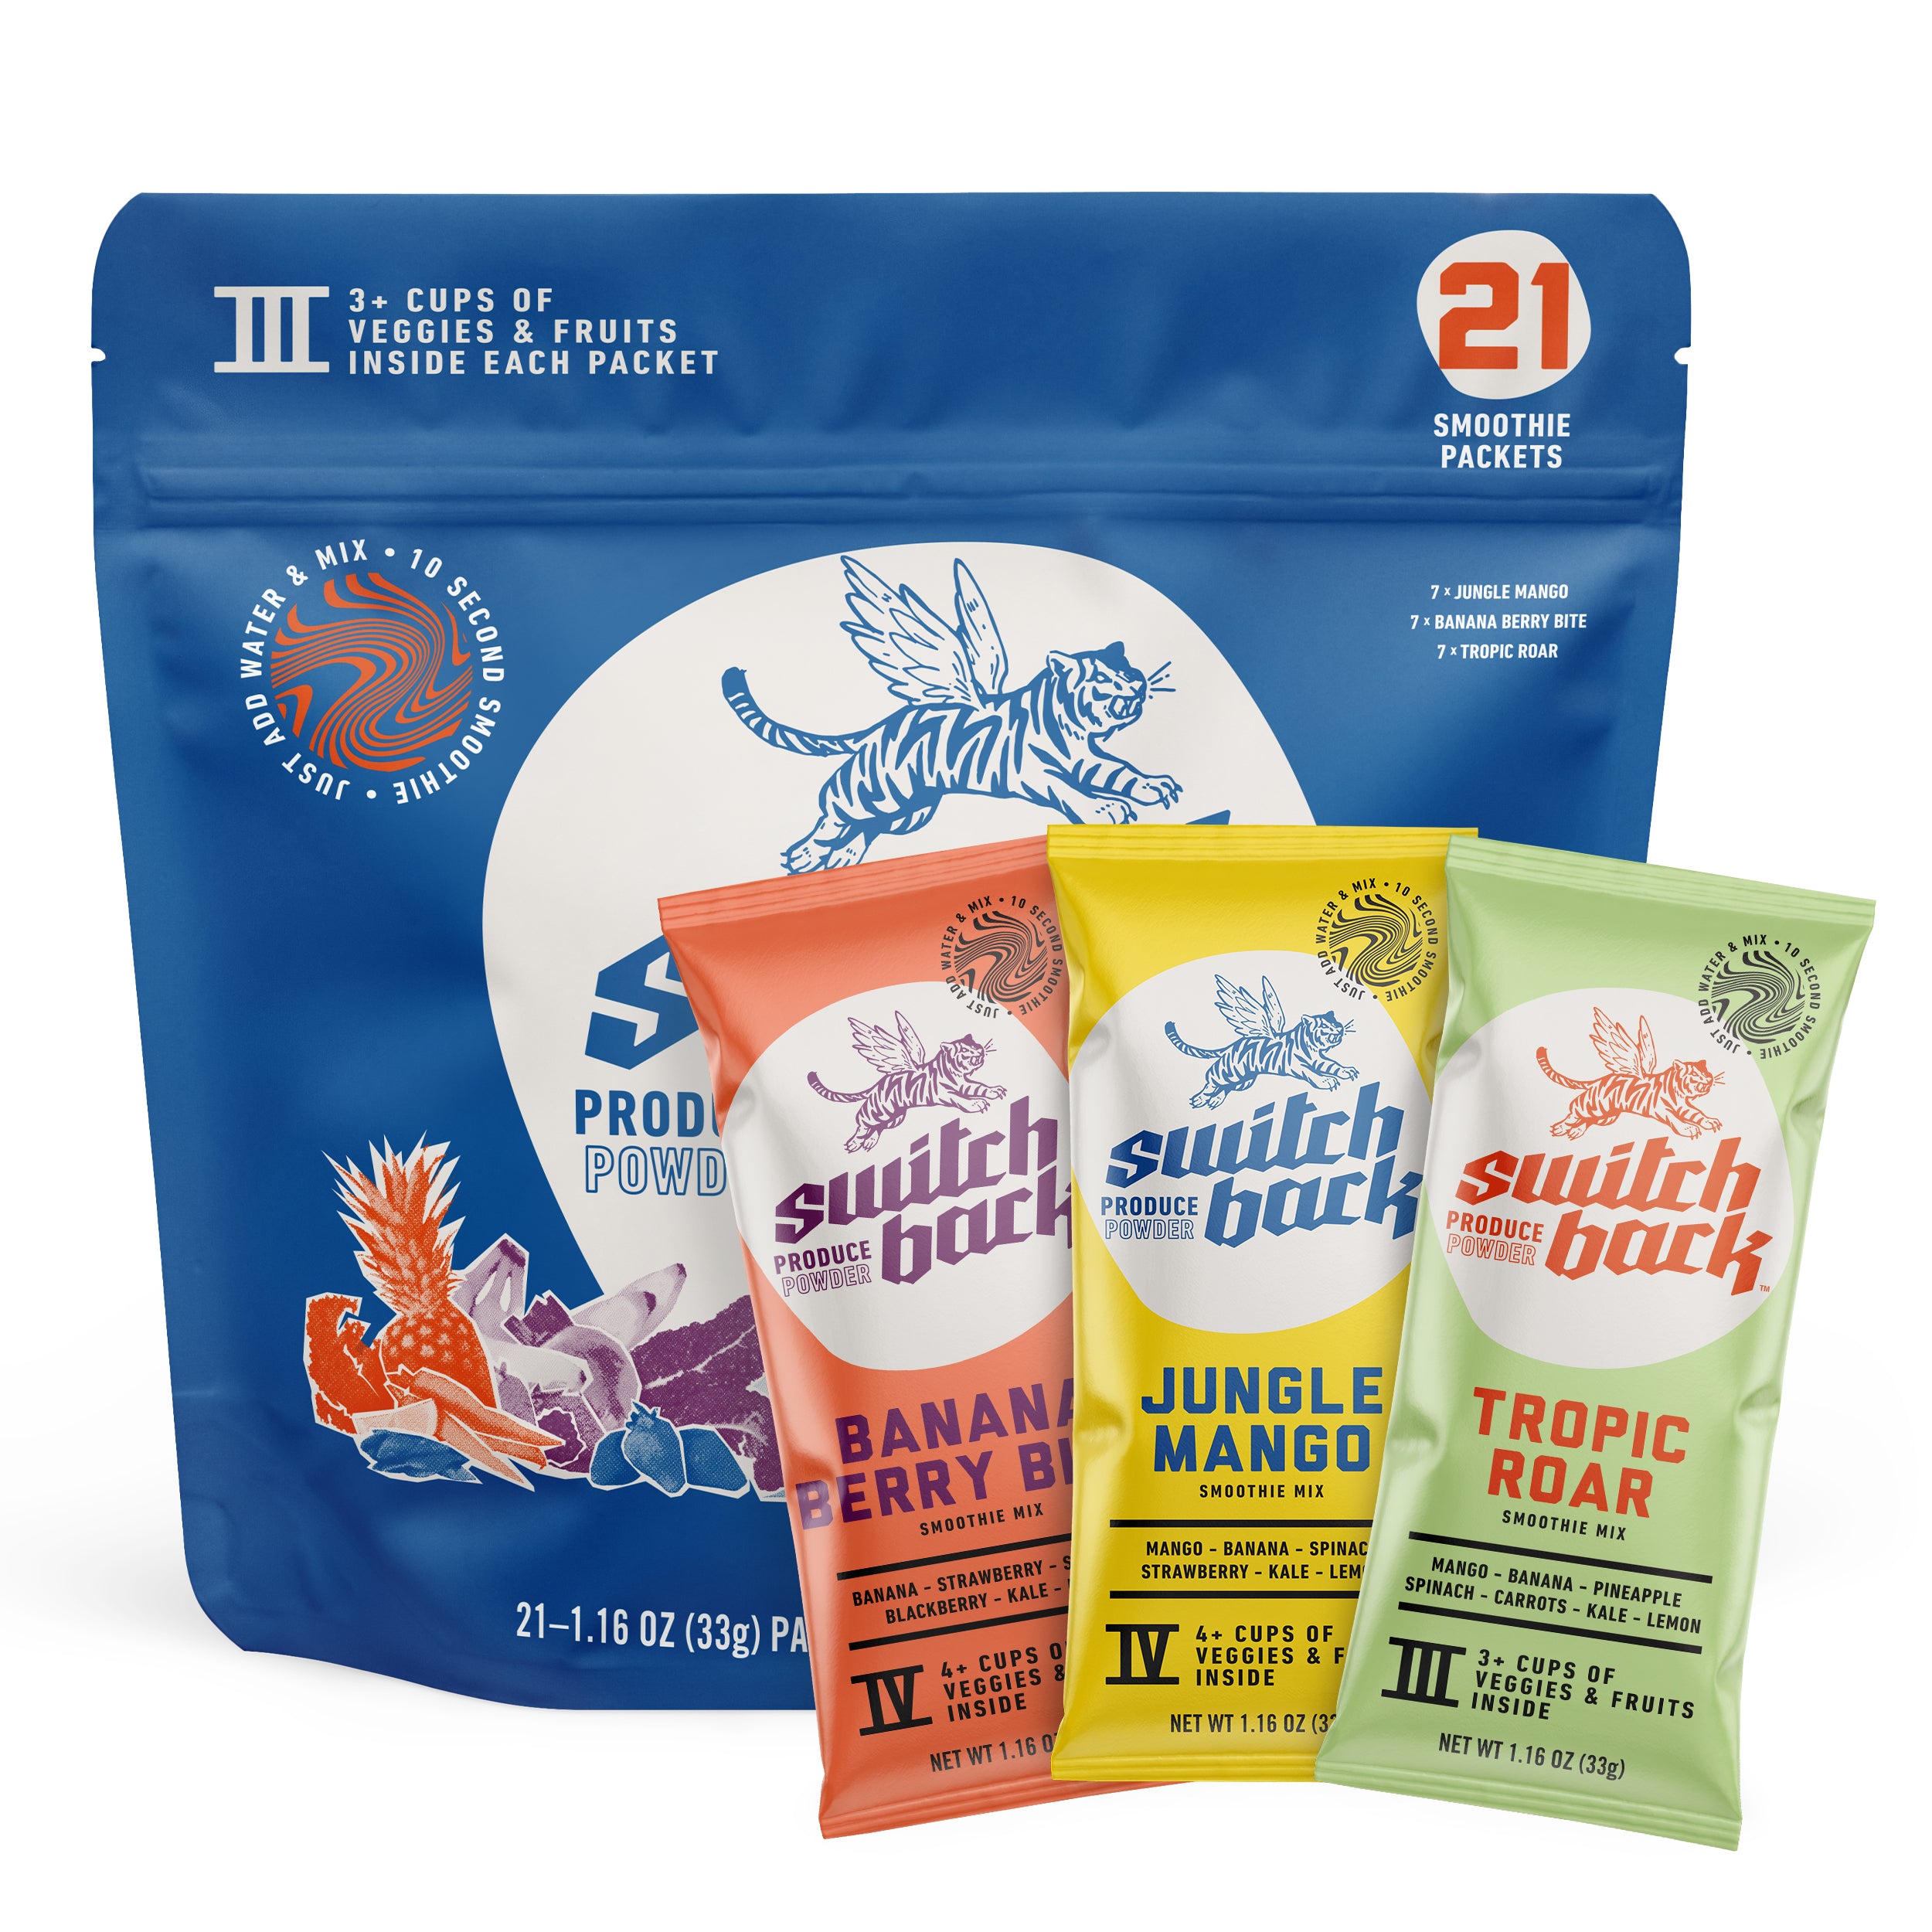 Banana Berry Bite Smoothie Mix (21 Pack or 150 Pack)